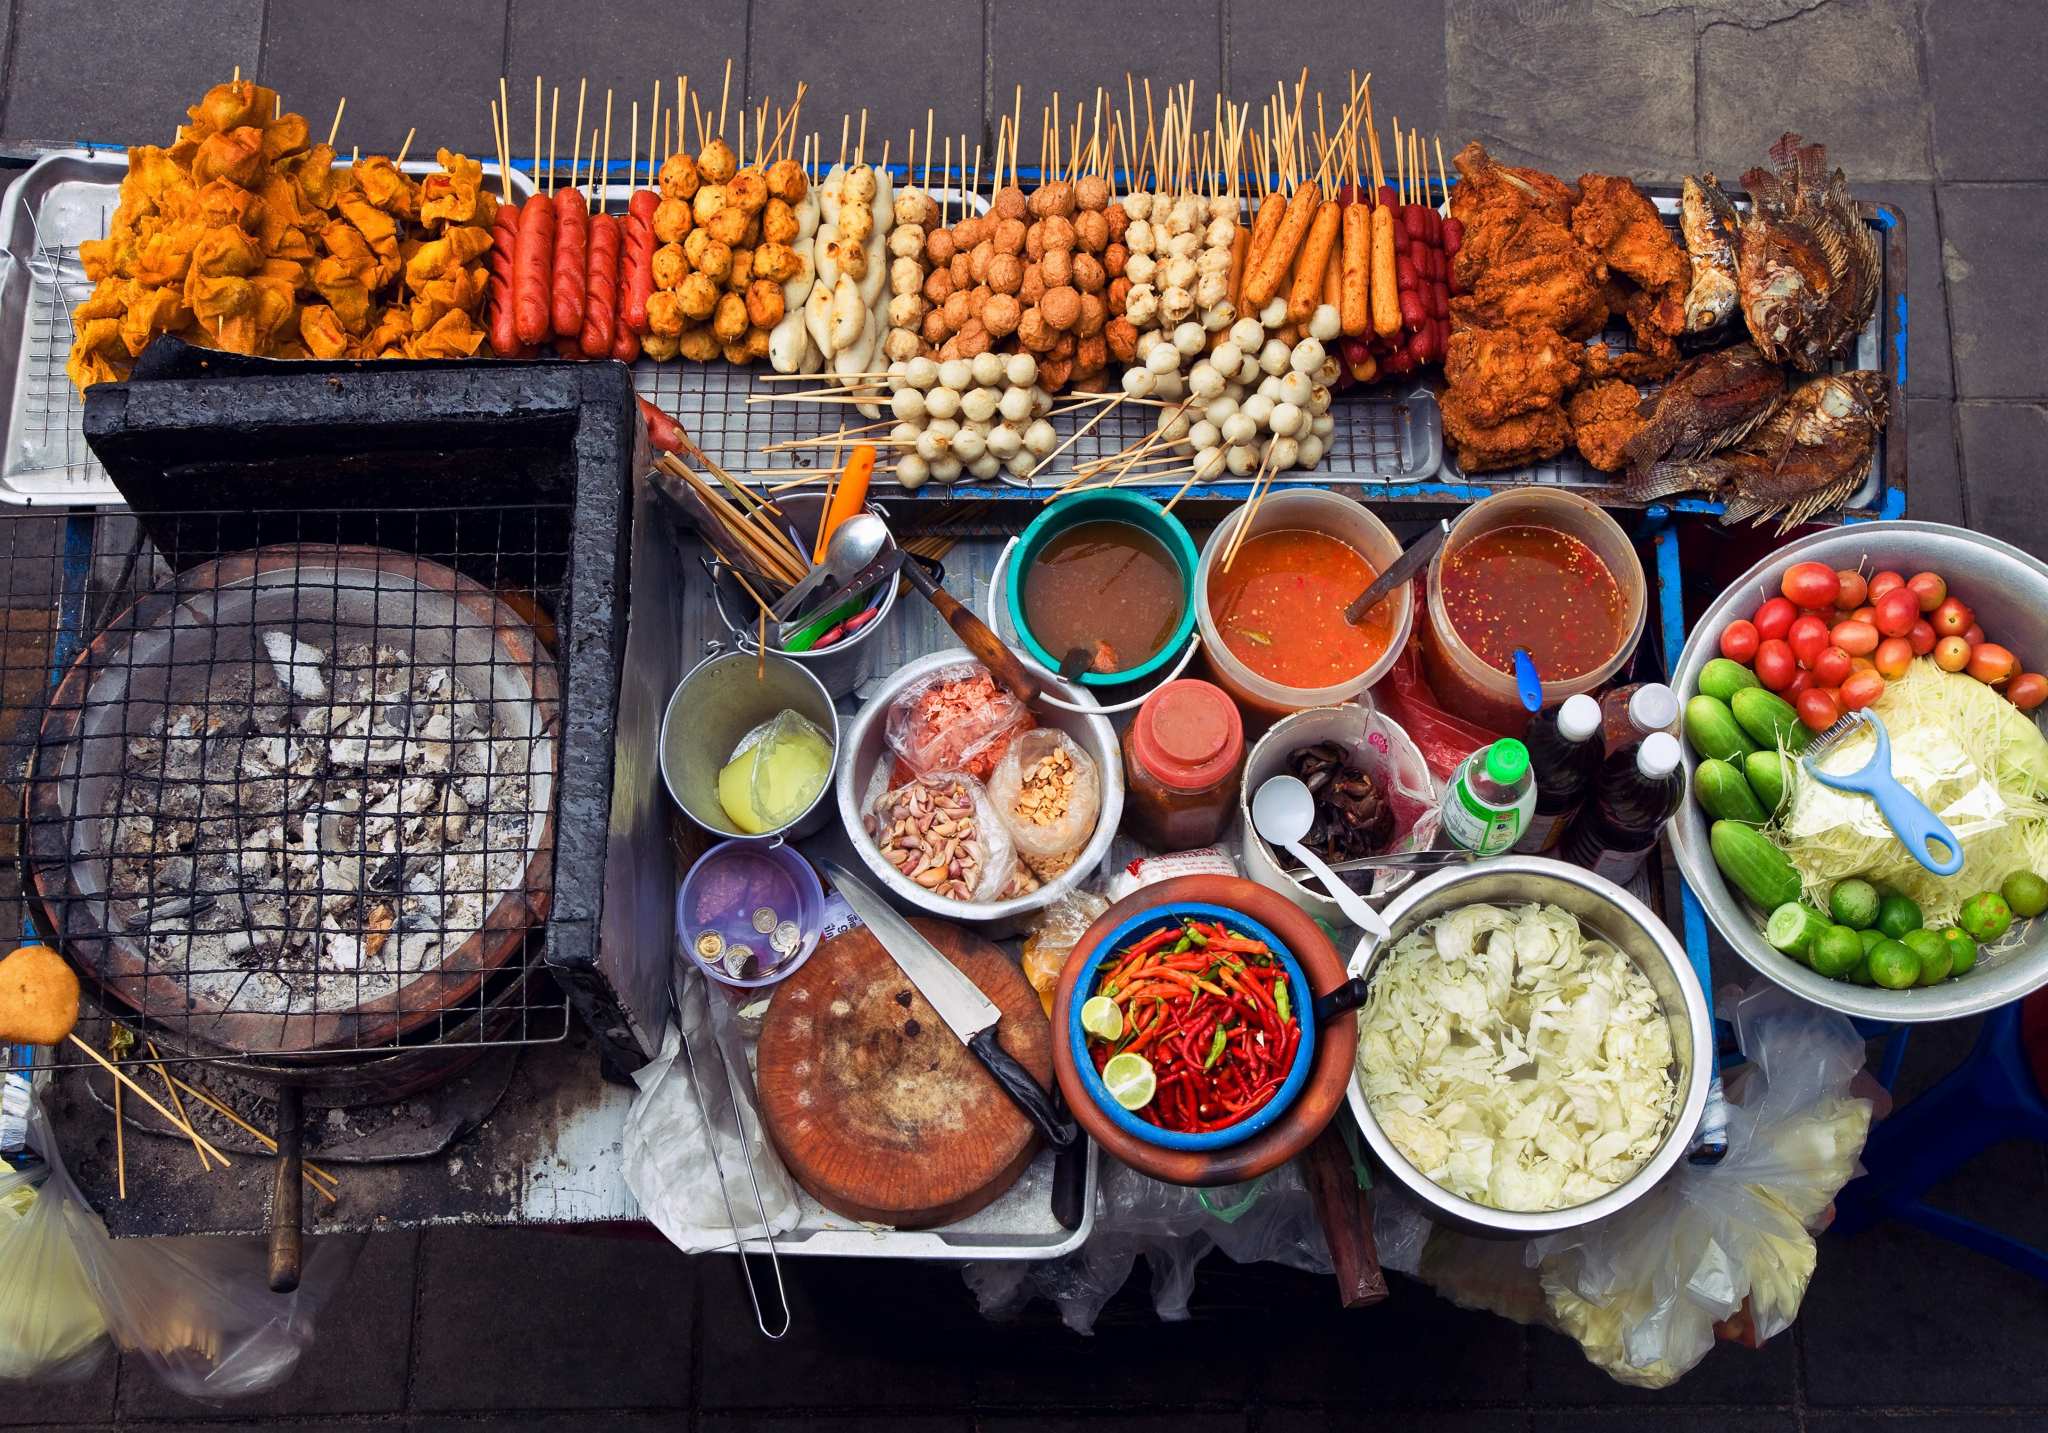 COULD STREET FOOD BE HEALTHY? – RL WEB